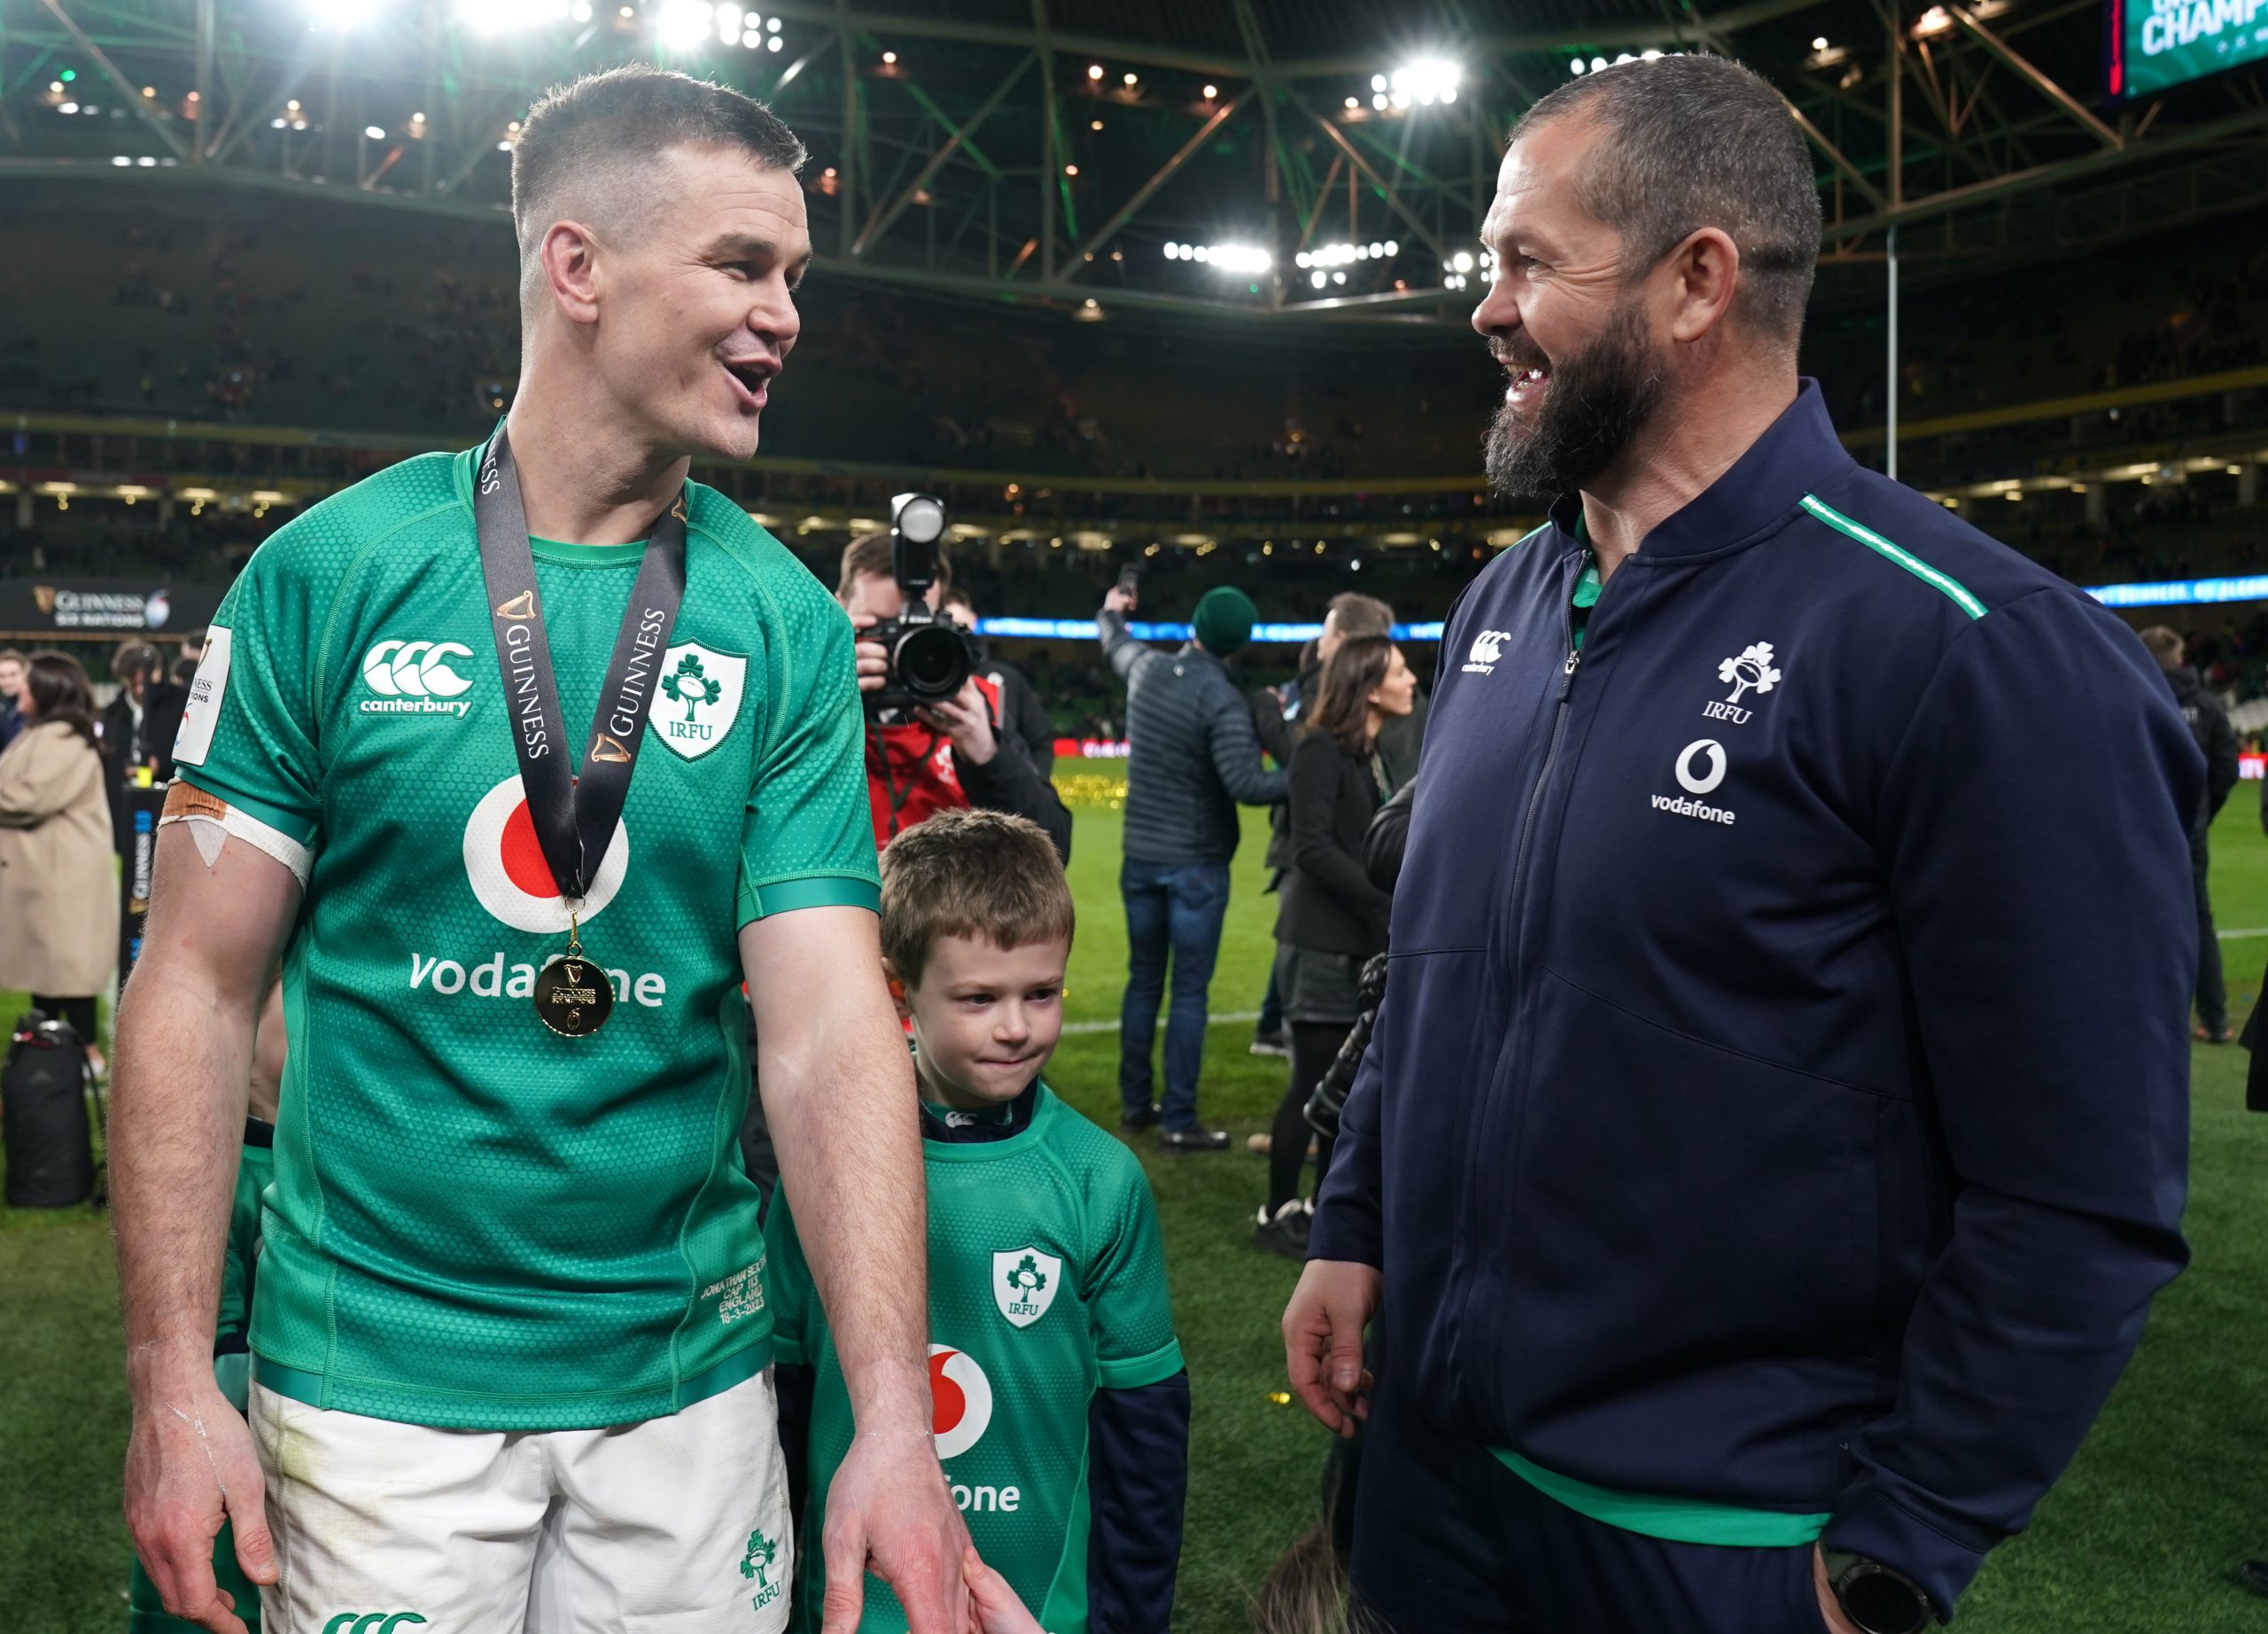 Andy Farrell hails Johnny Sexton as Ireland’s best player ever after Dublin win